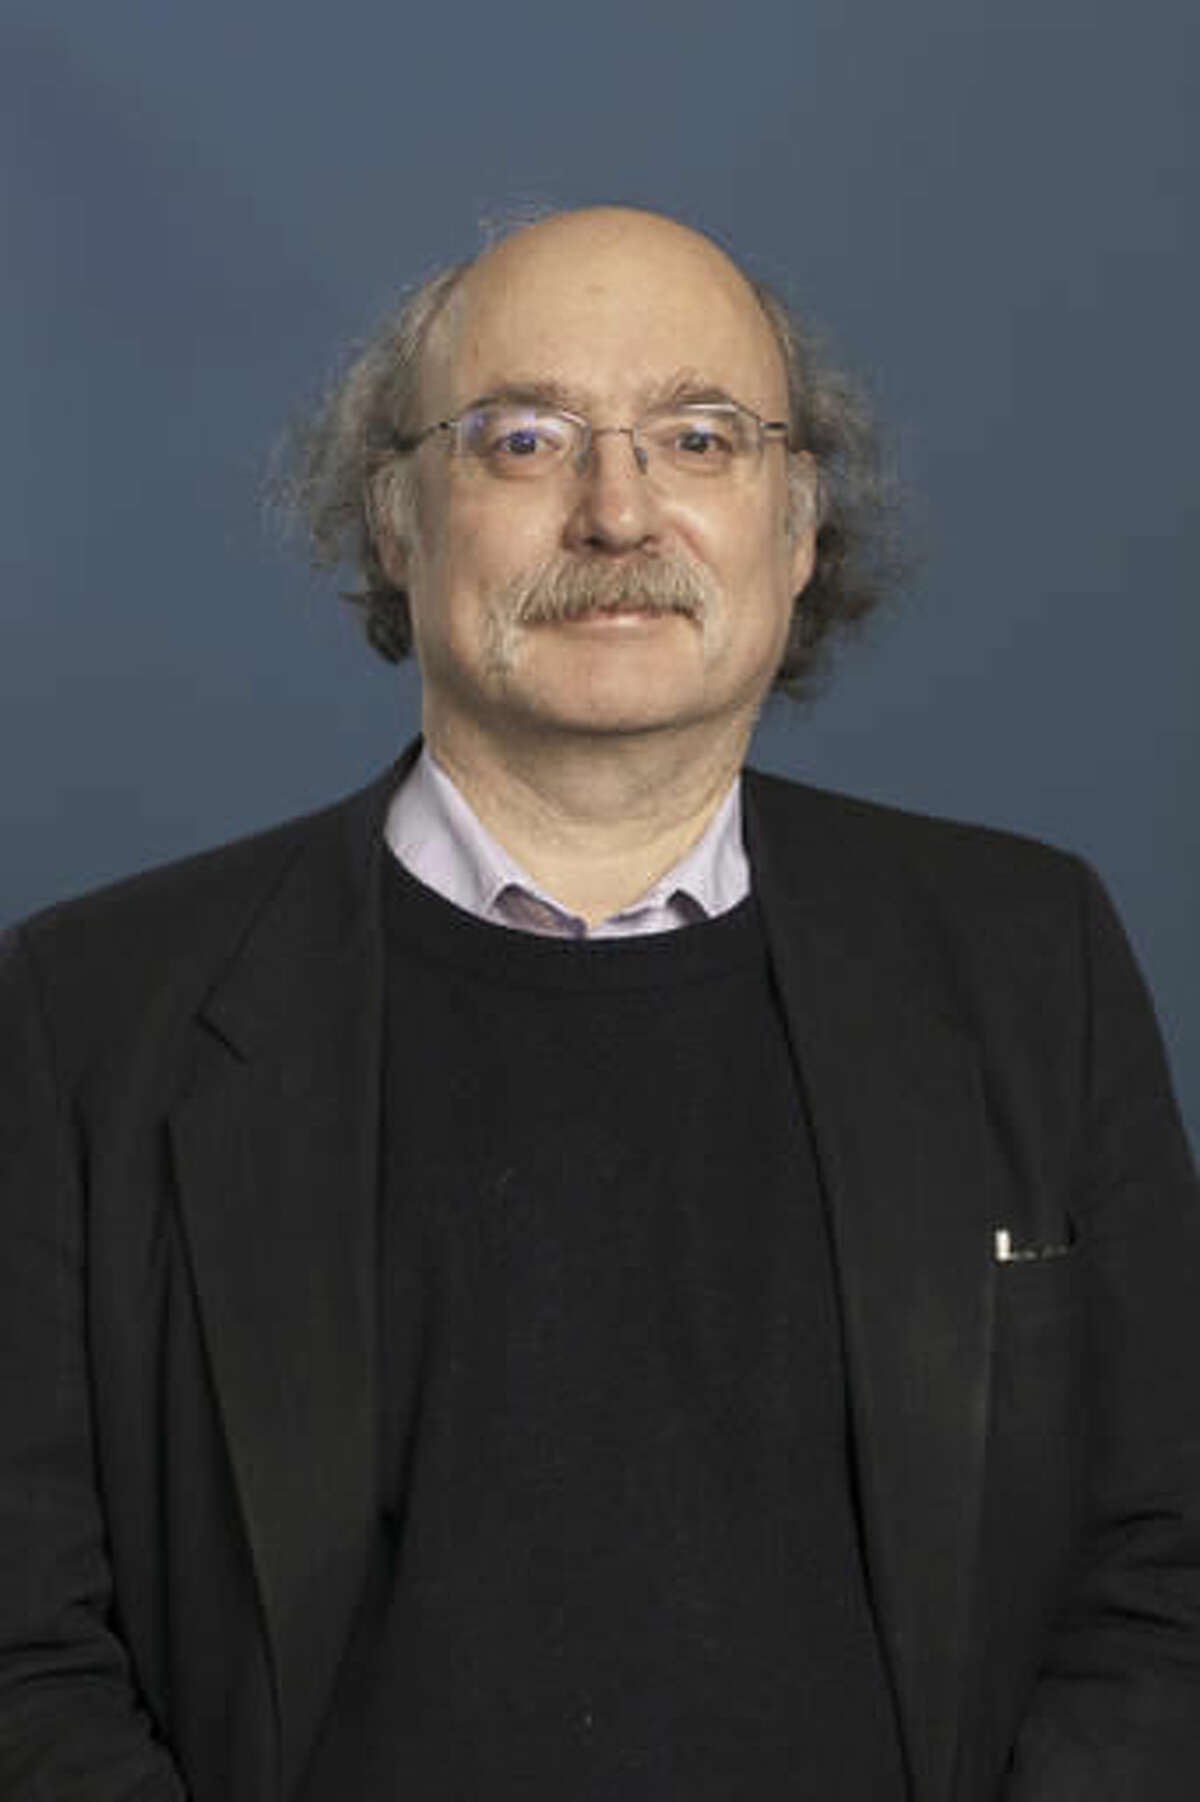 This undated photo provided by Princeton University shows Duncan Haldane, who is one of the scientists that has been awarded the Nobel Prize in physics announced Tuesday, Oct. 4, 2016. The Royal Swedish Academy of Sciences has cited David Thouless, Haldane and Michael Kosterlitz for "theoretical discoveries of topological phase transitions and topological phases of matter." (Denise Applewhite/Princeton University, Office of Communications via AP)